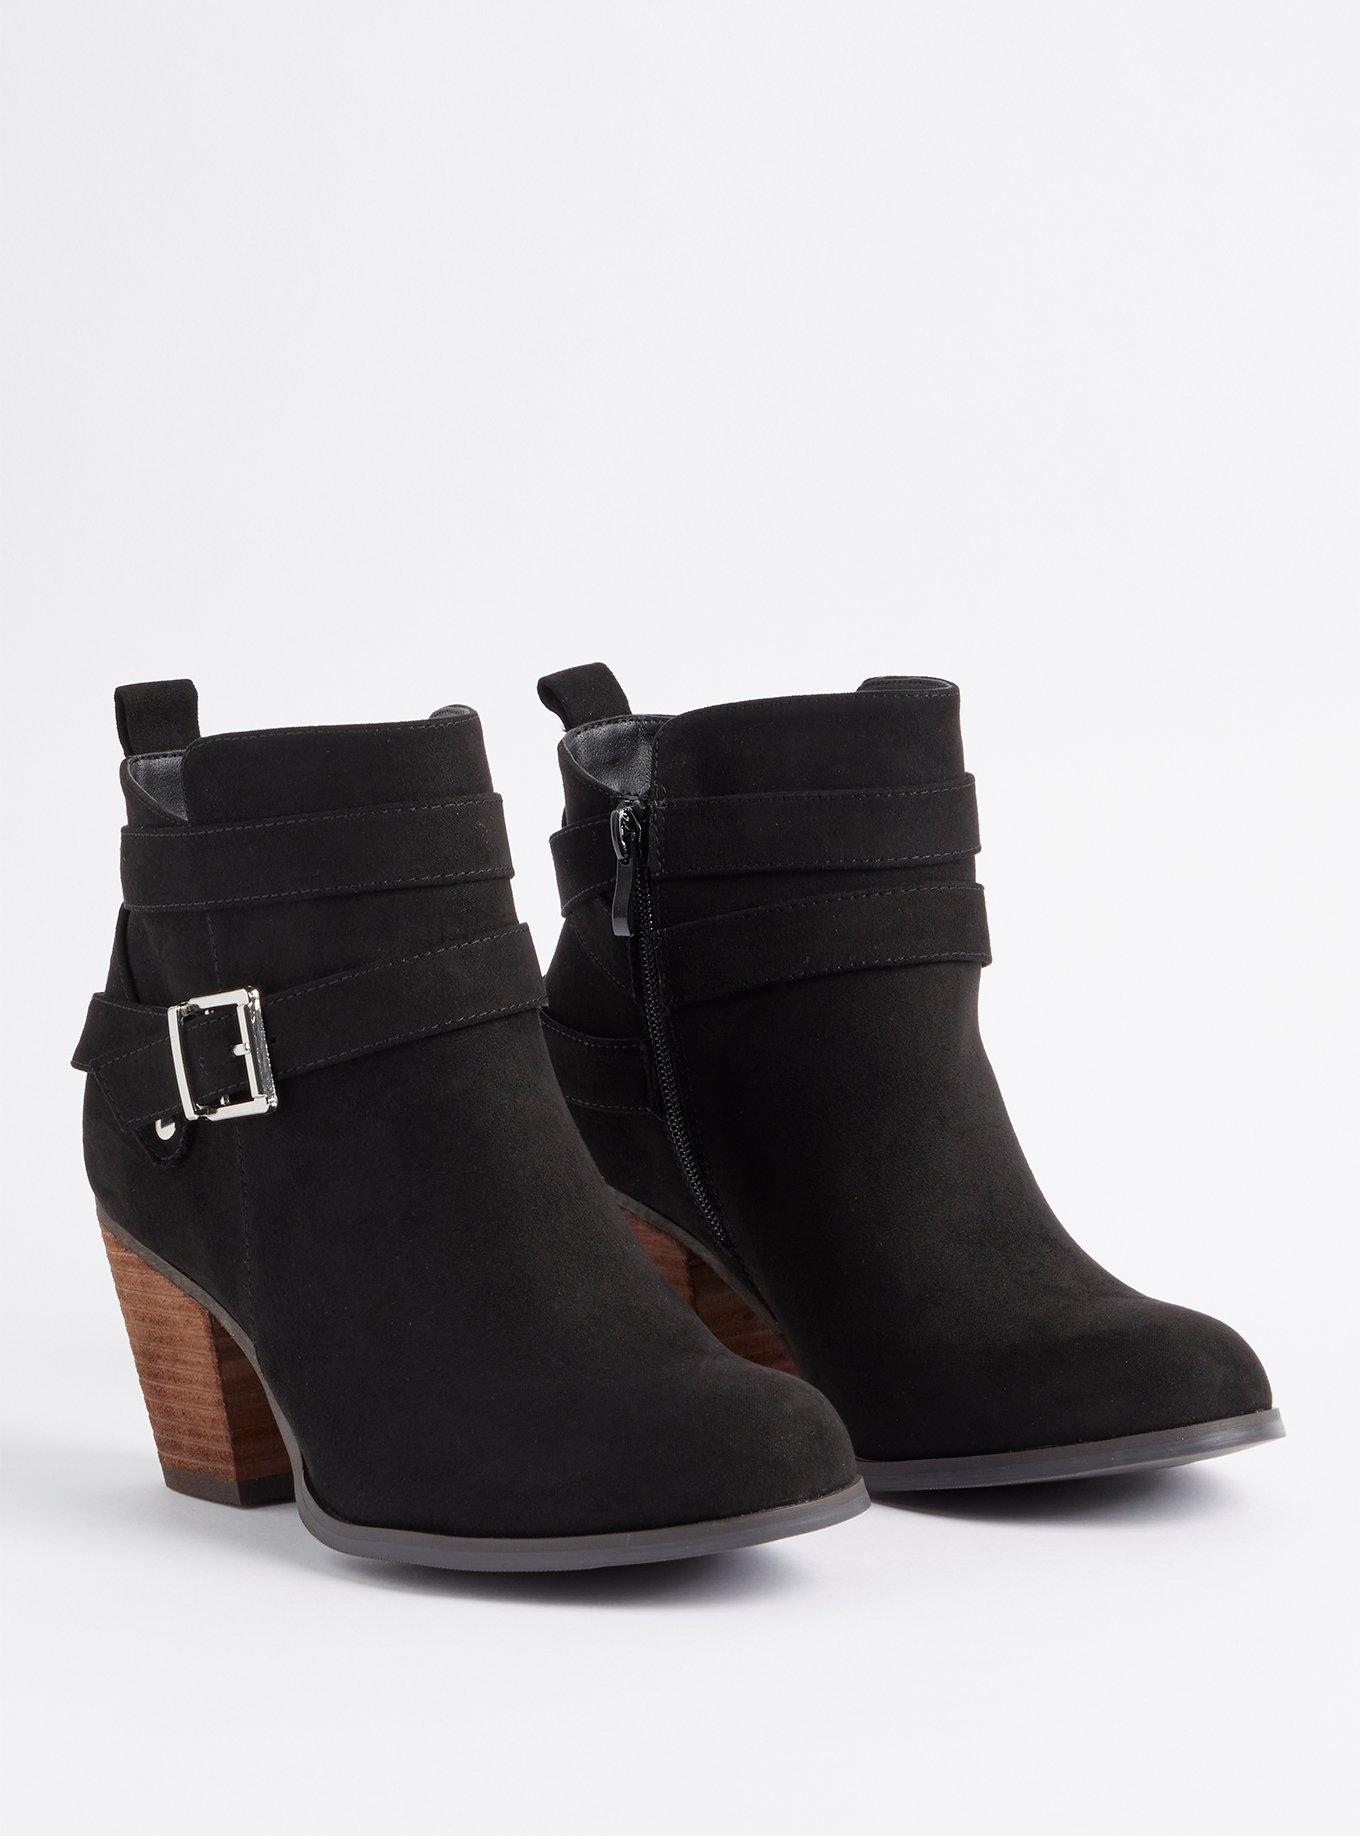 Plus Size - Stacked Ankle Bootie - Black (WW) - Torrid